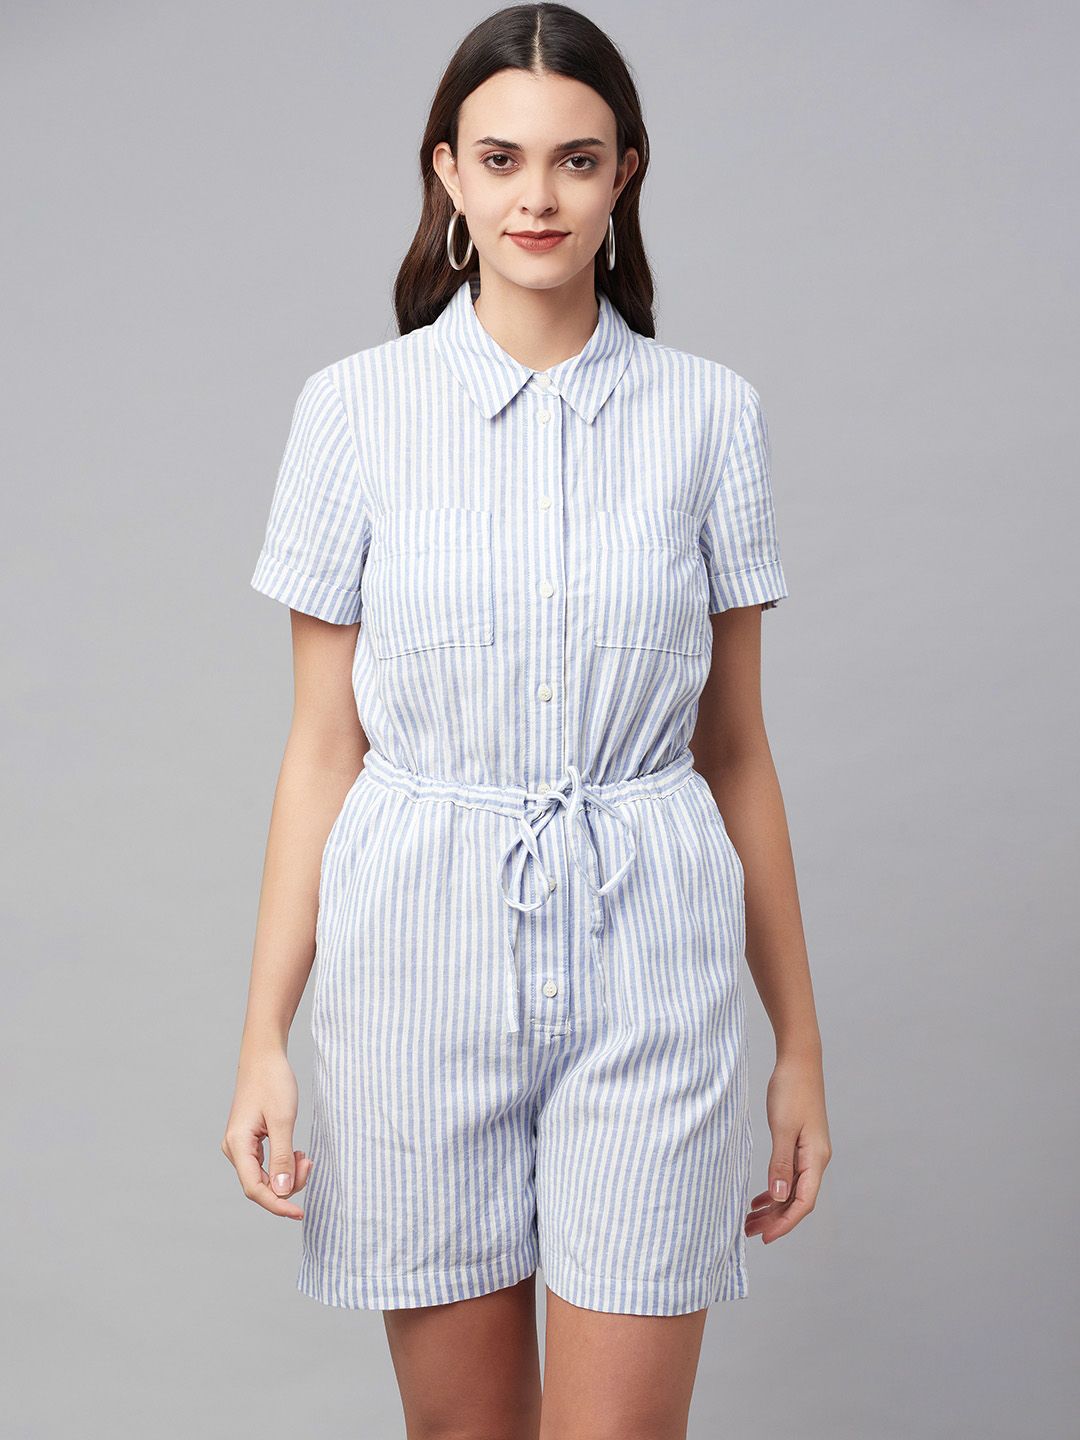 Marks & Spencer Women Blue & White Striped Waist Tie-Ups Jumpsuit Price in India